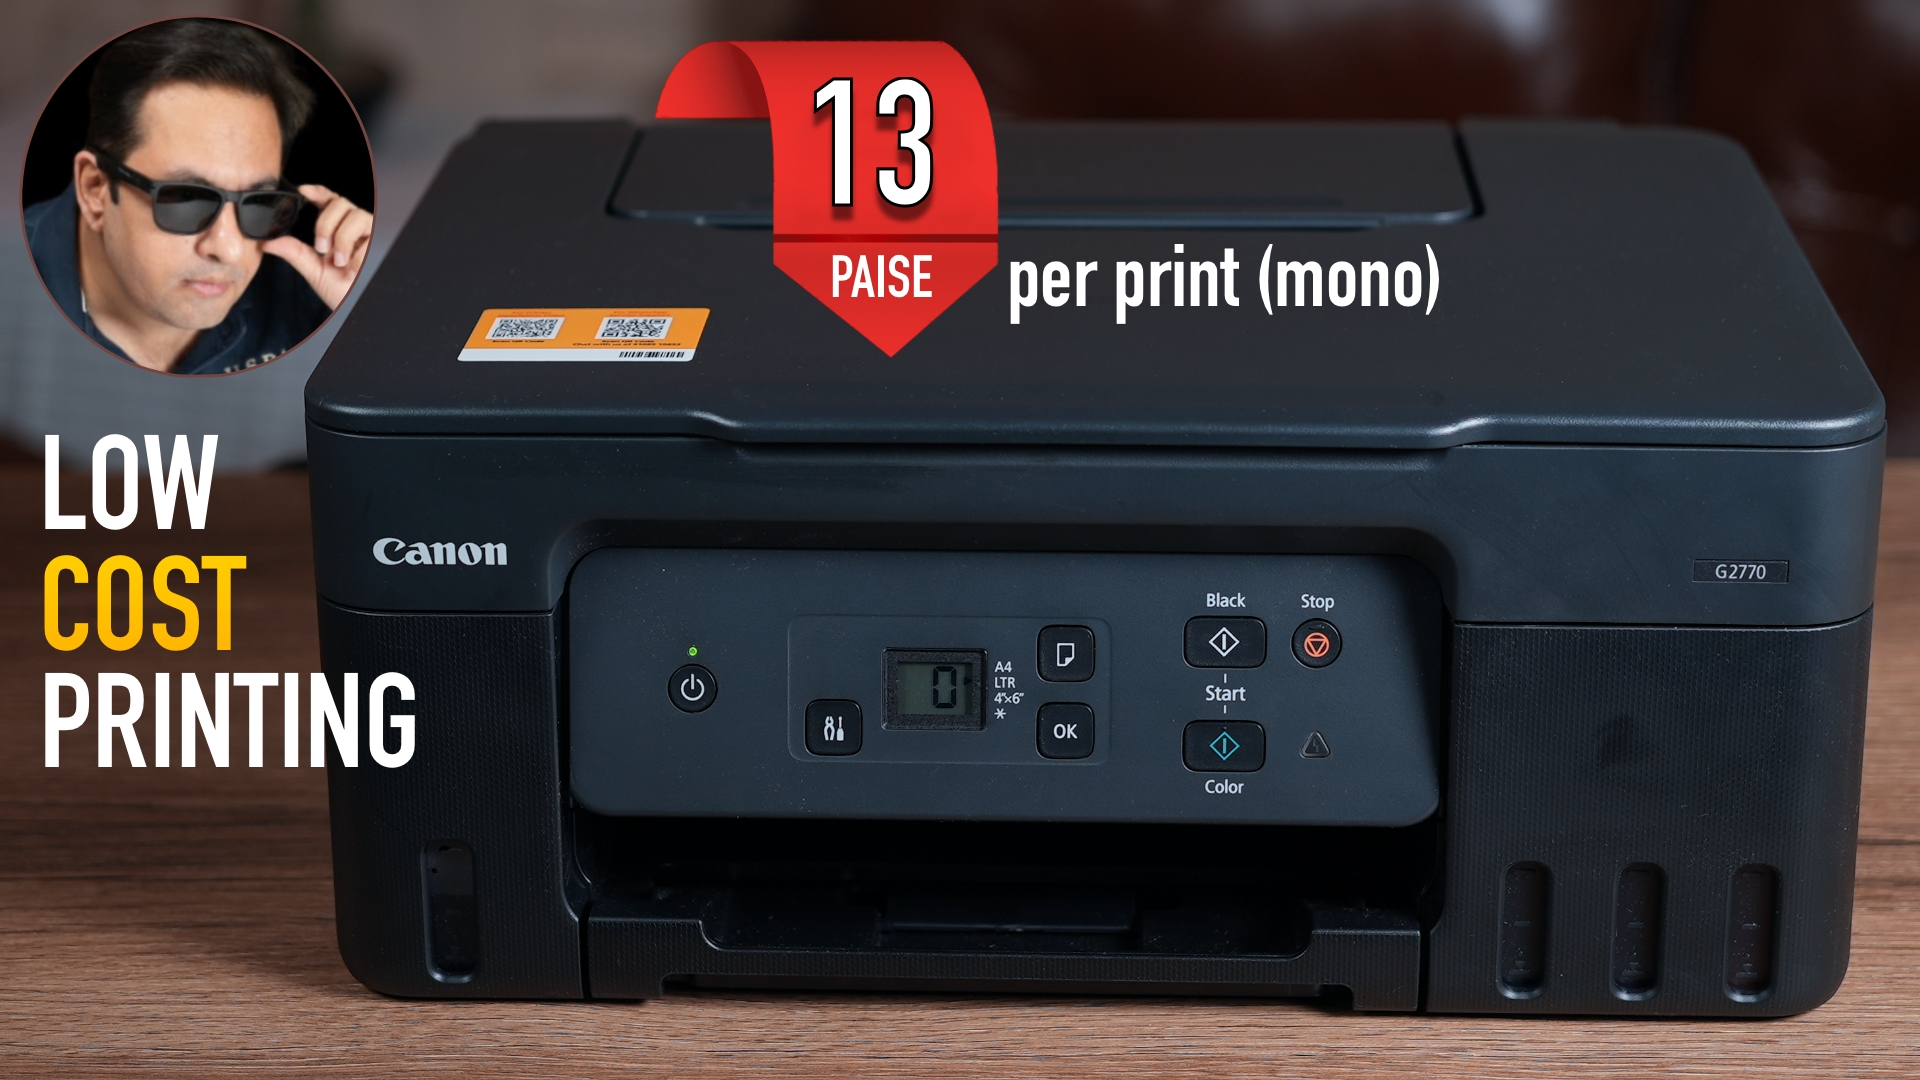 Canon Pixma G2770 A Versatile Refillable Ink Tank Printer For Cost Effective Printing 8210